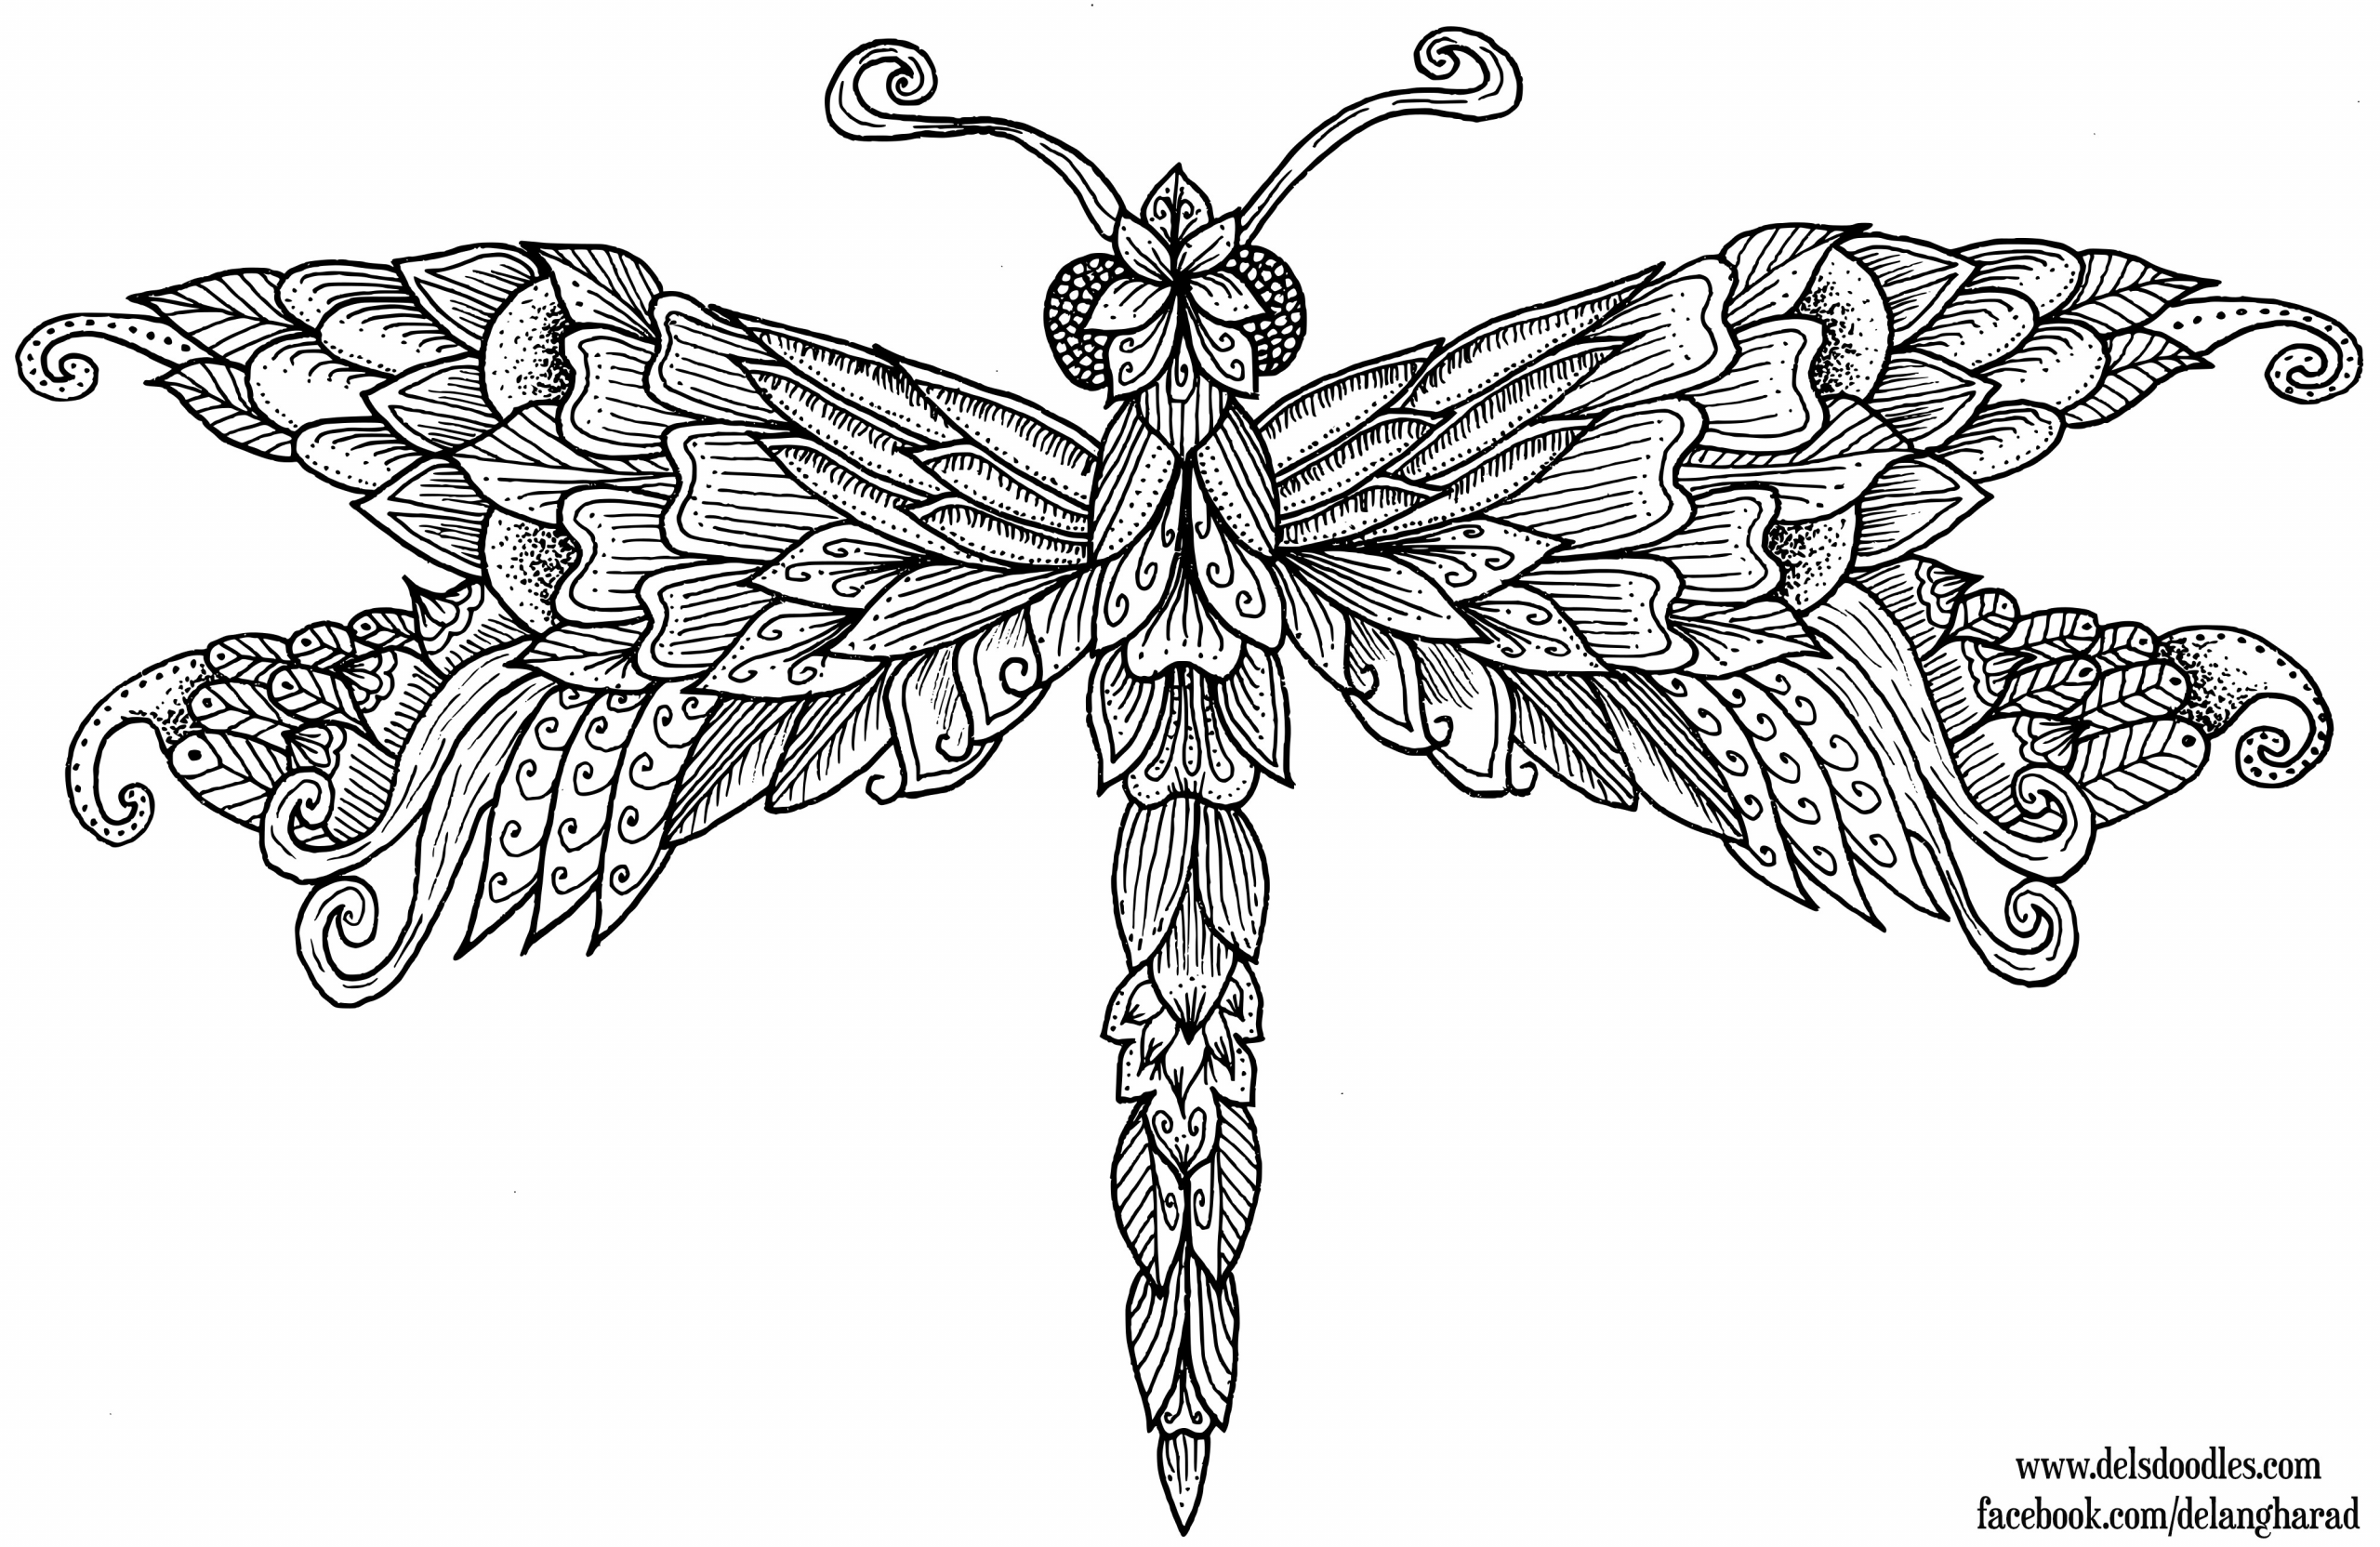 23-best-dragonfly-coloring-pages-for-adults-home-family-style-and